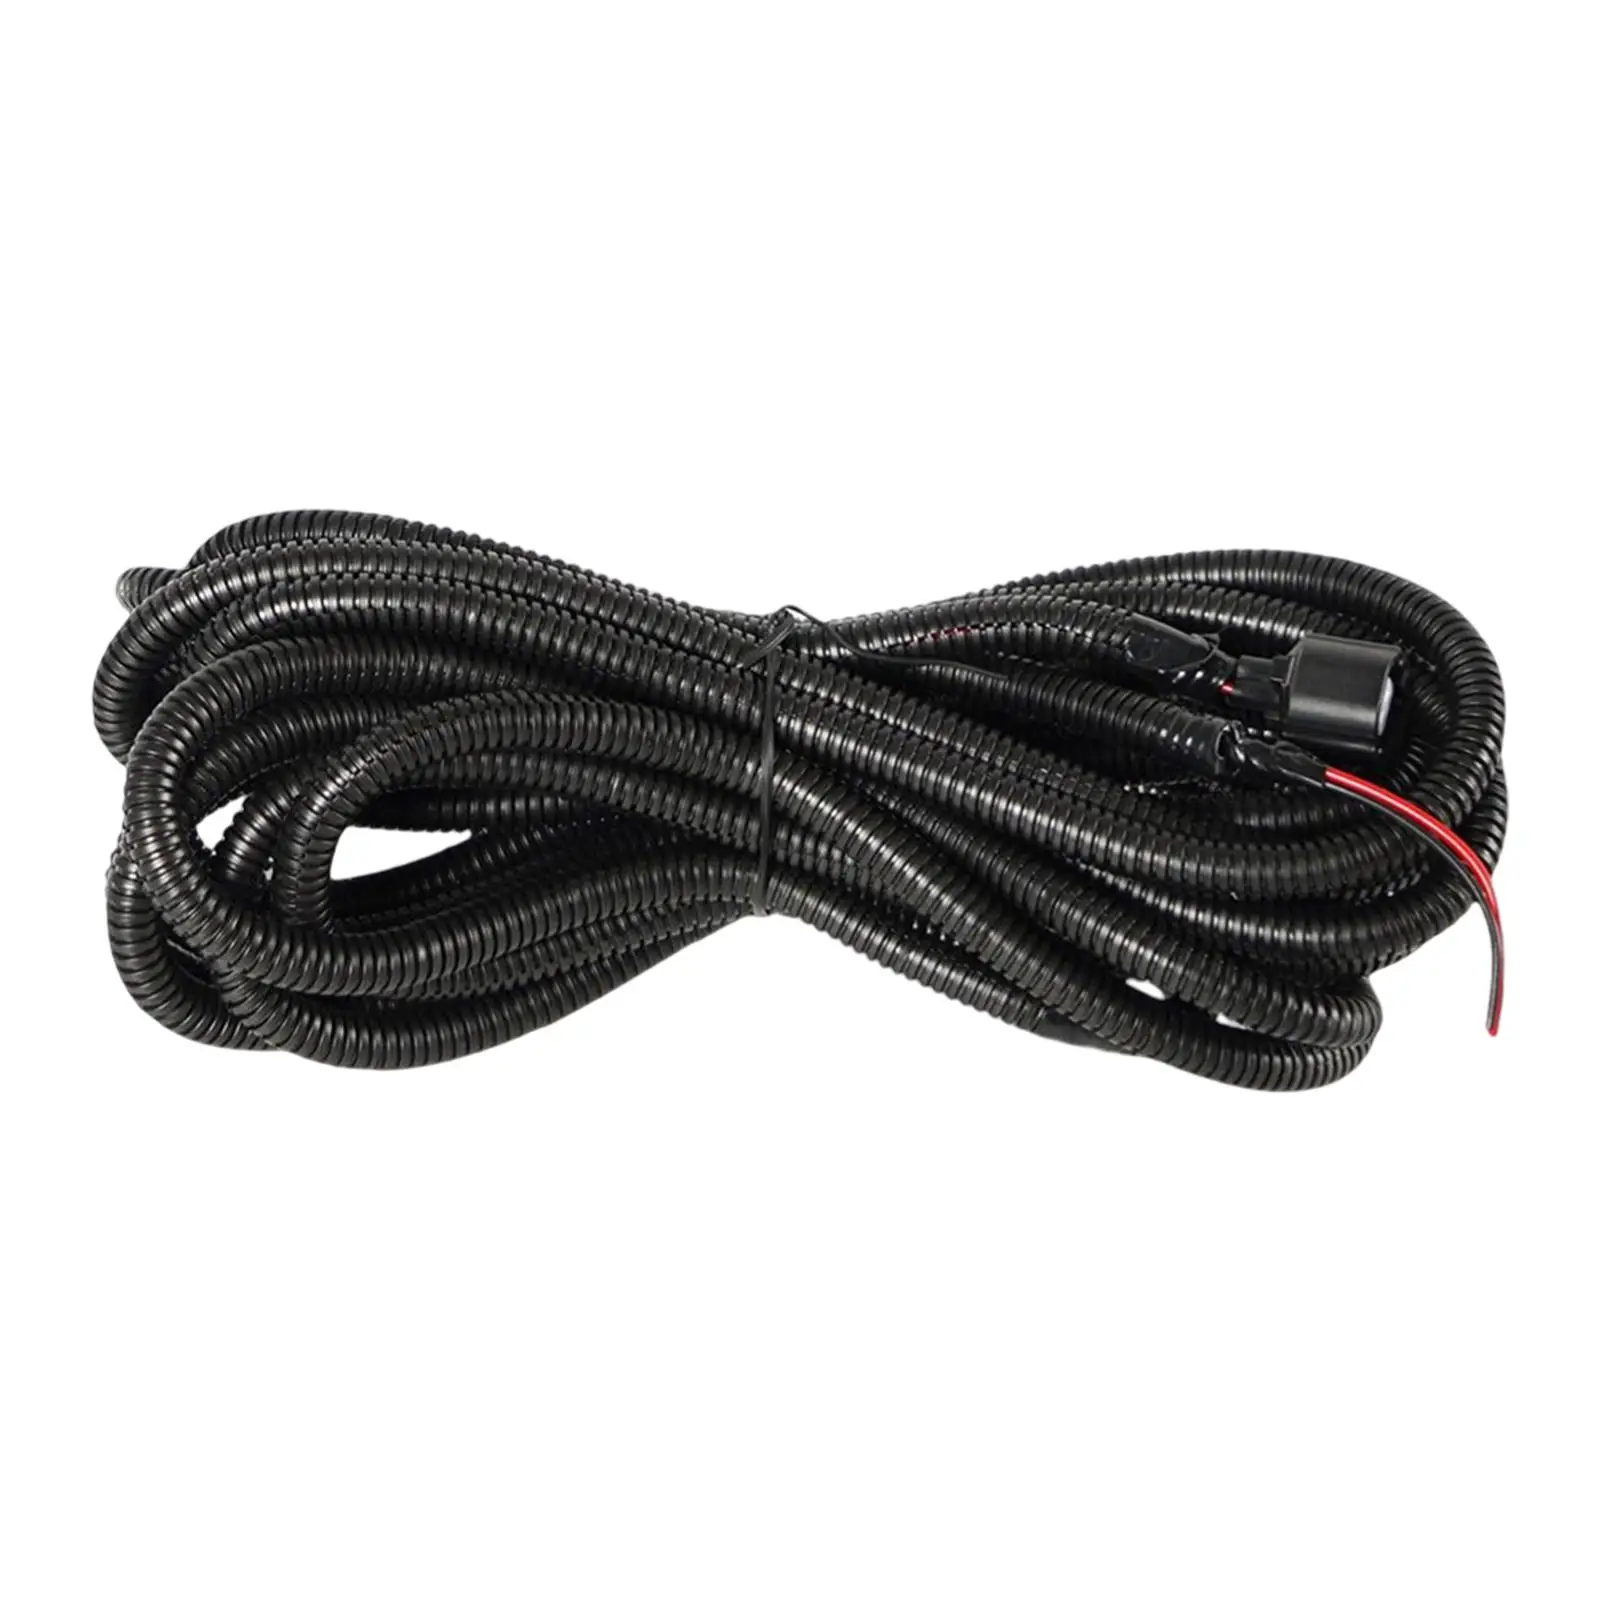 Electric Locker Wire Harness Axle P5155359 12V Insulating Surface for Jeep Wrangler TJ Lj JK Jku 44 20ft Long Connect Harness